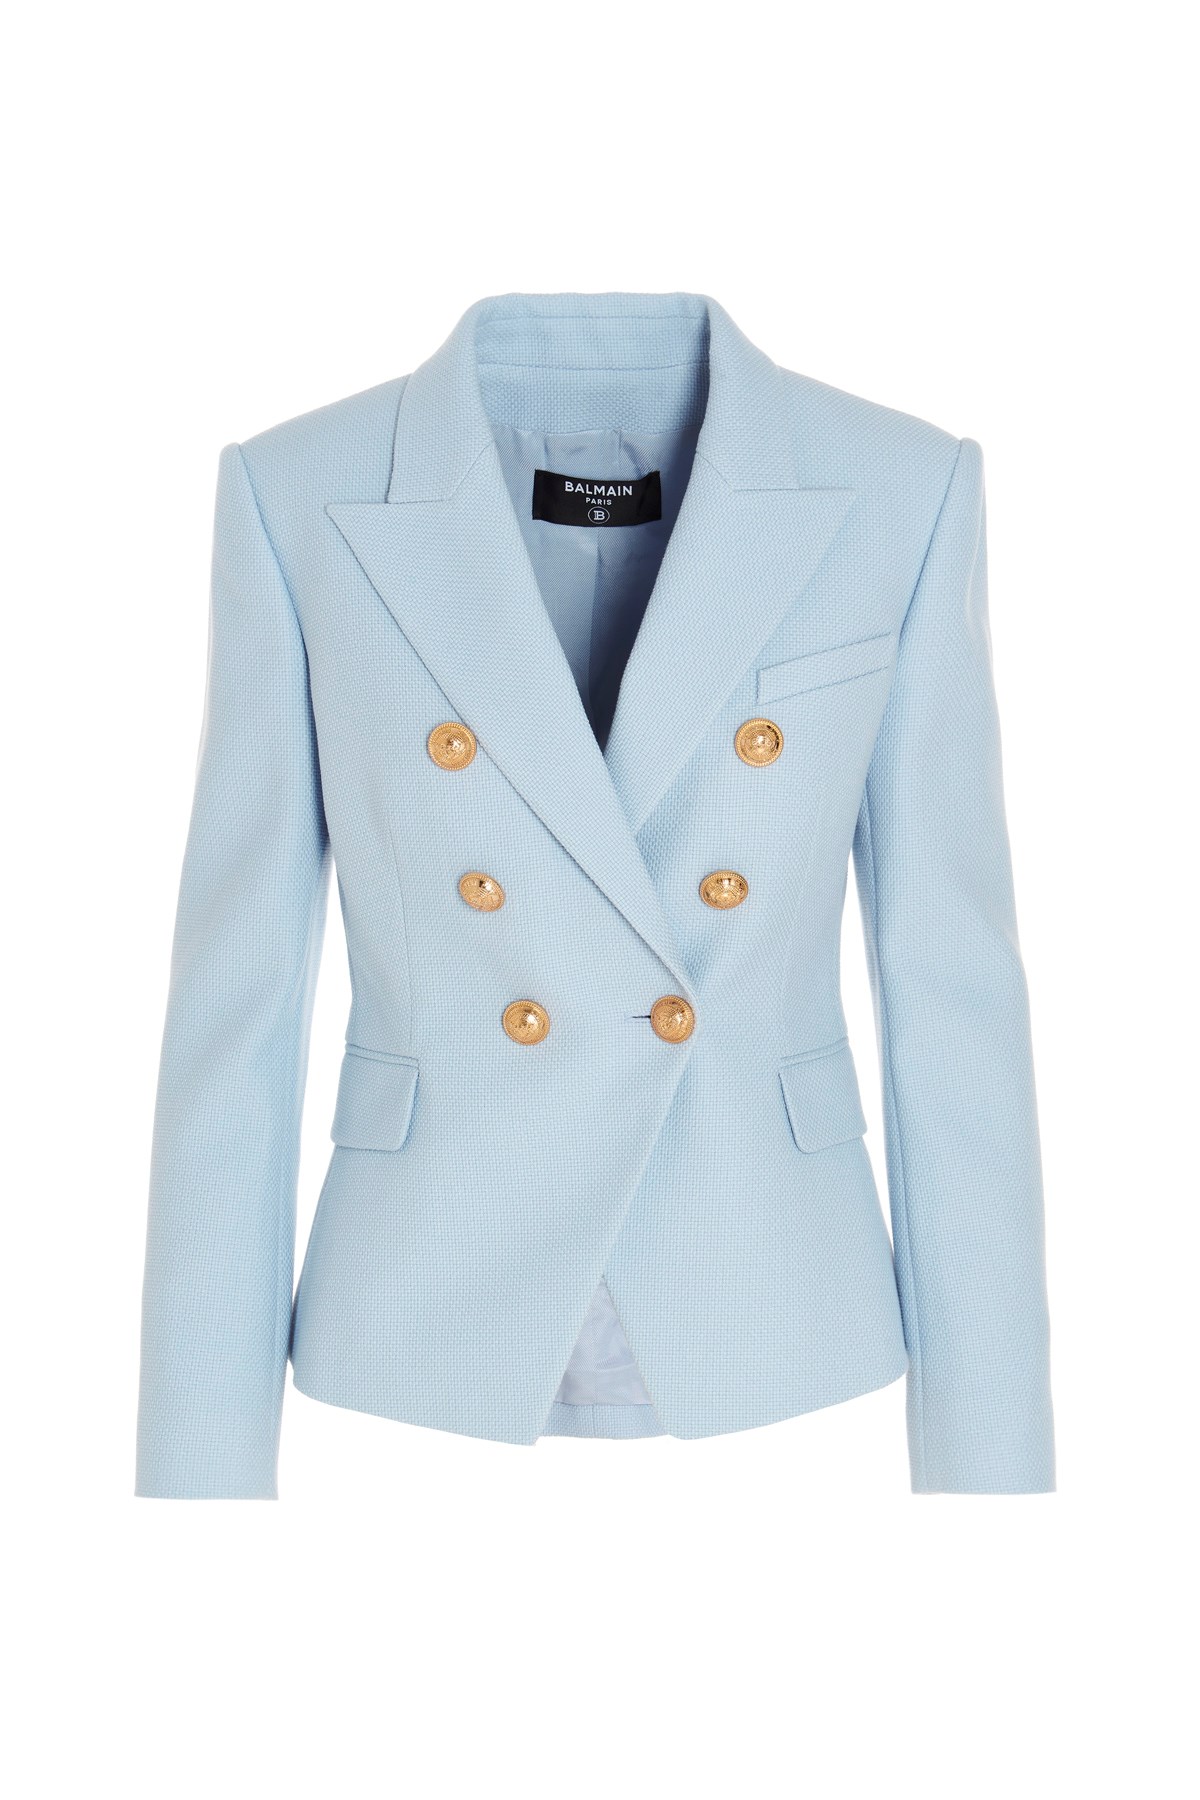 BALMAIN Six Gold Buttons Double-Breasted Blazer